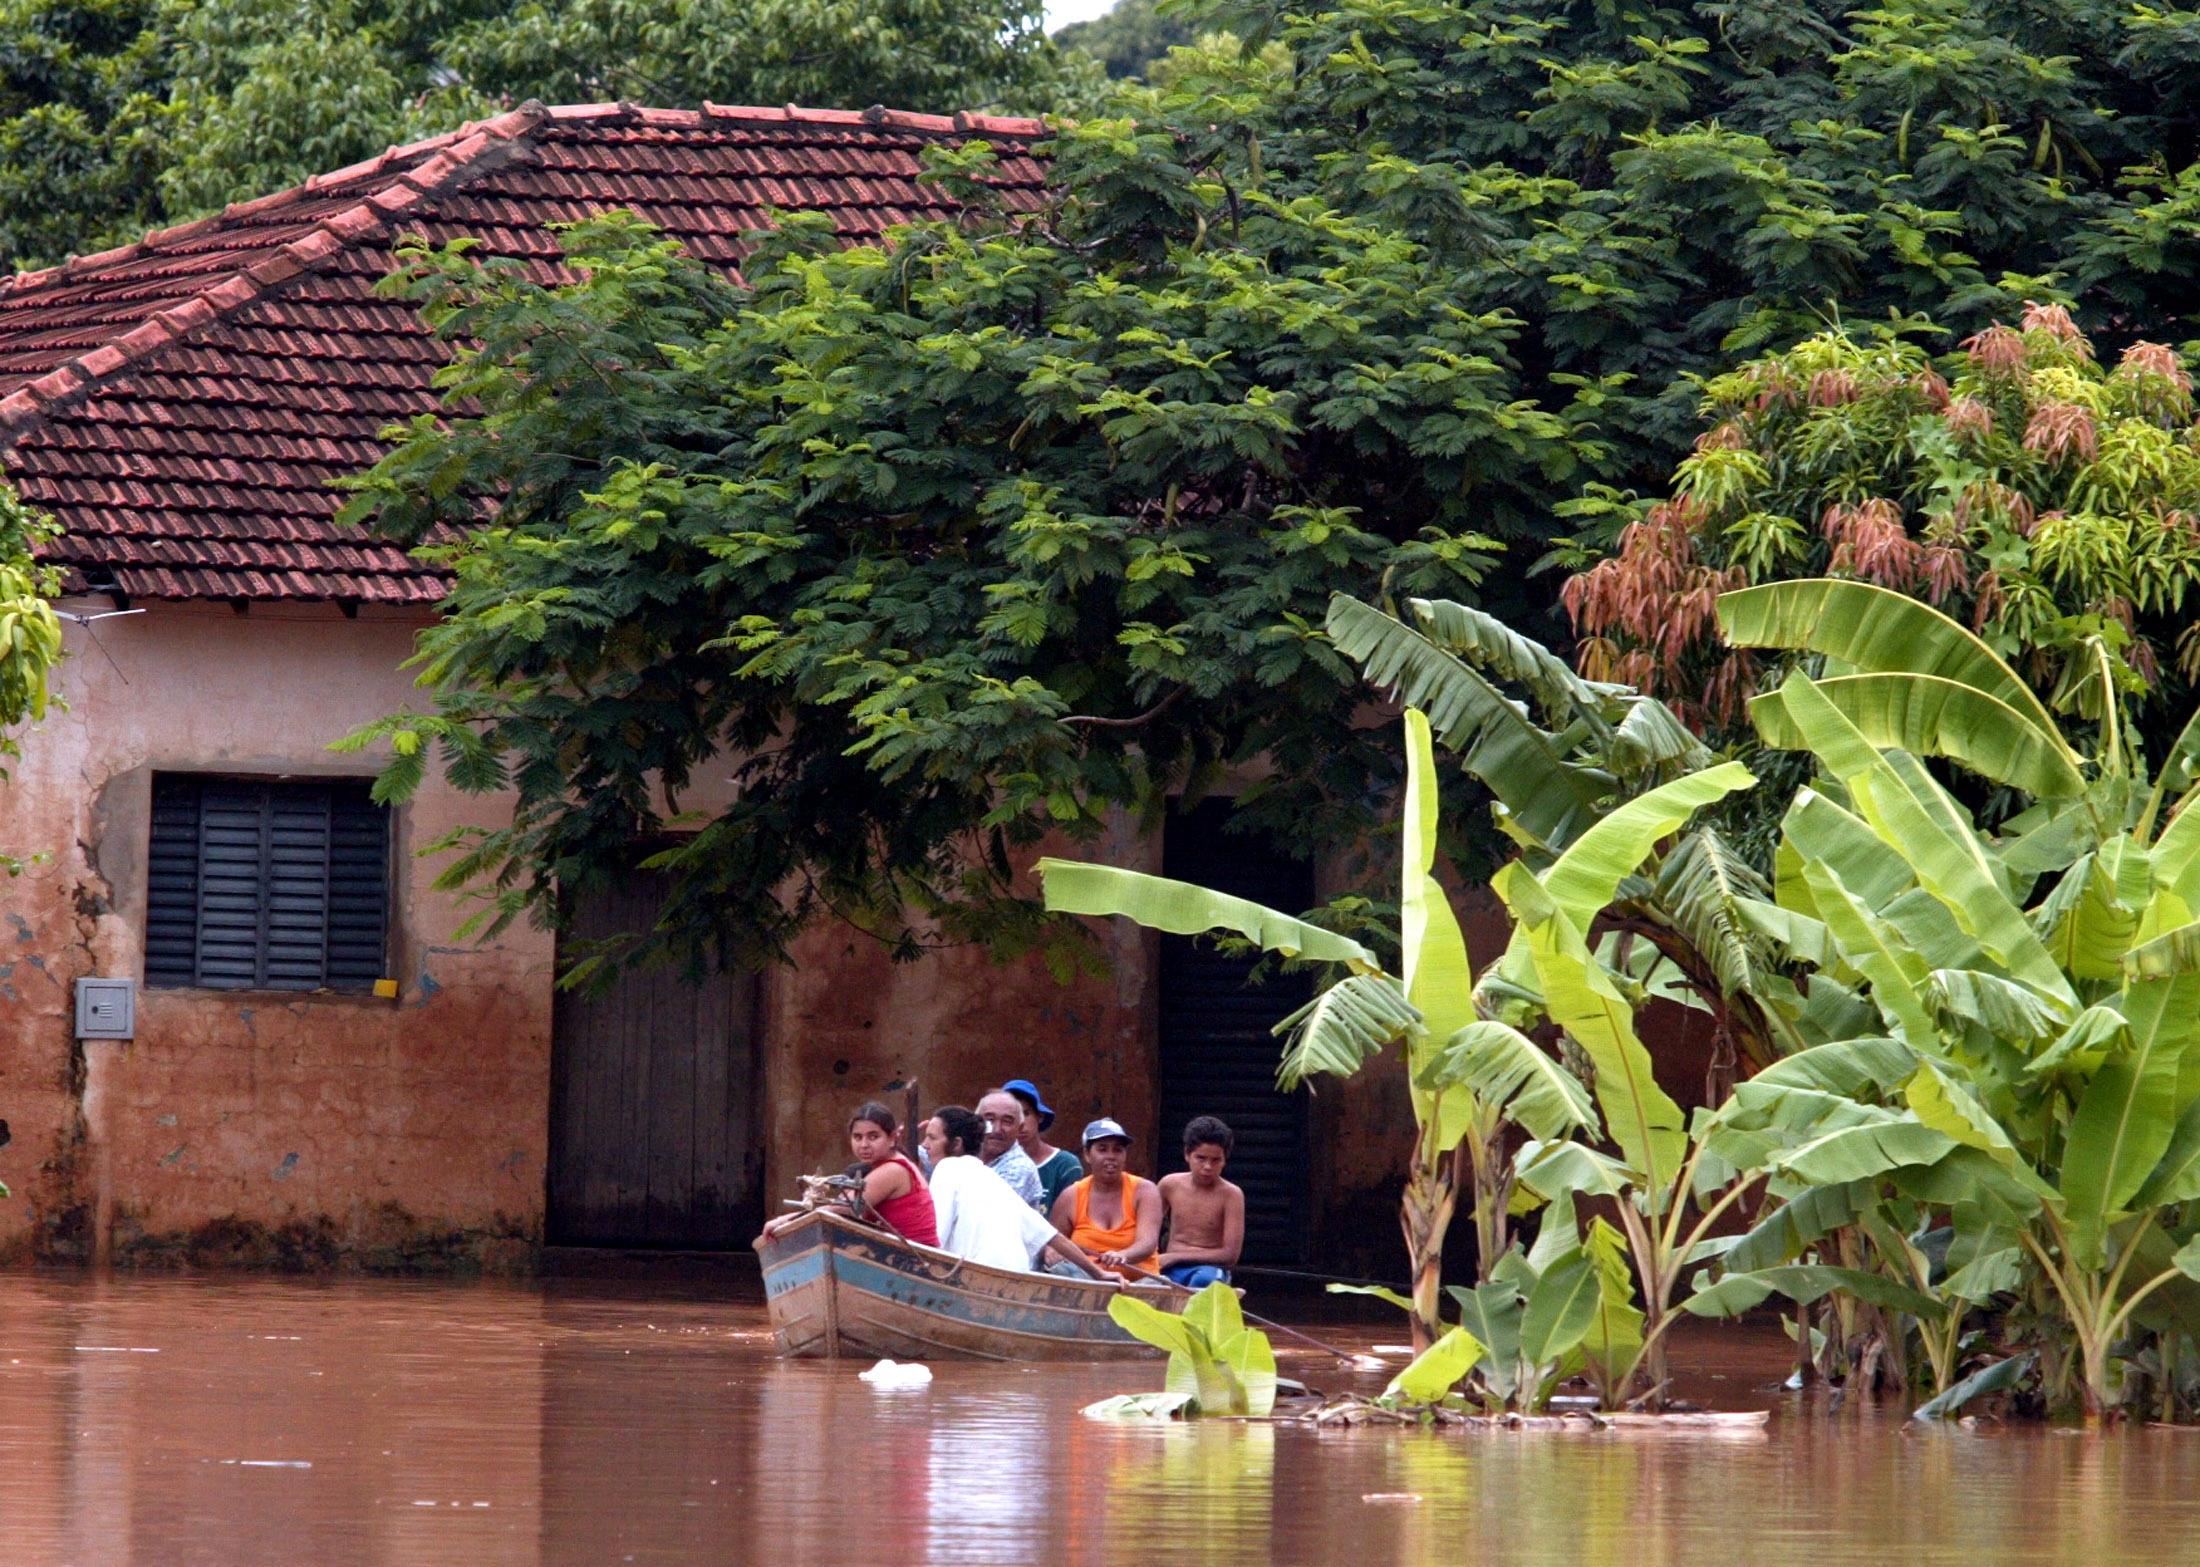 Residents in southeast Brazil evacuated due to floods.